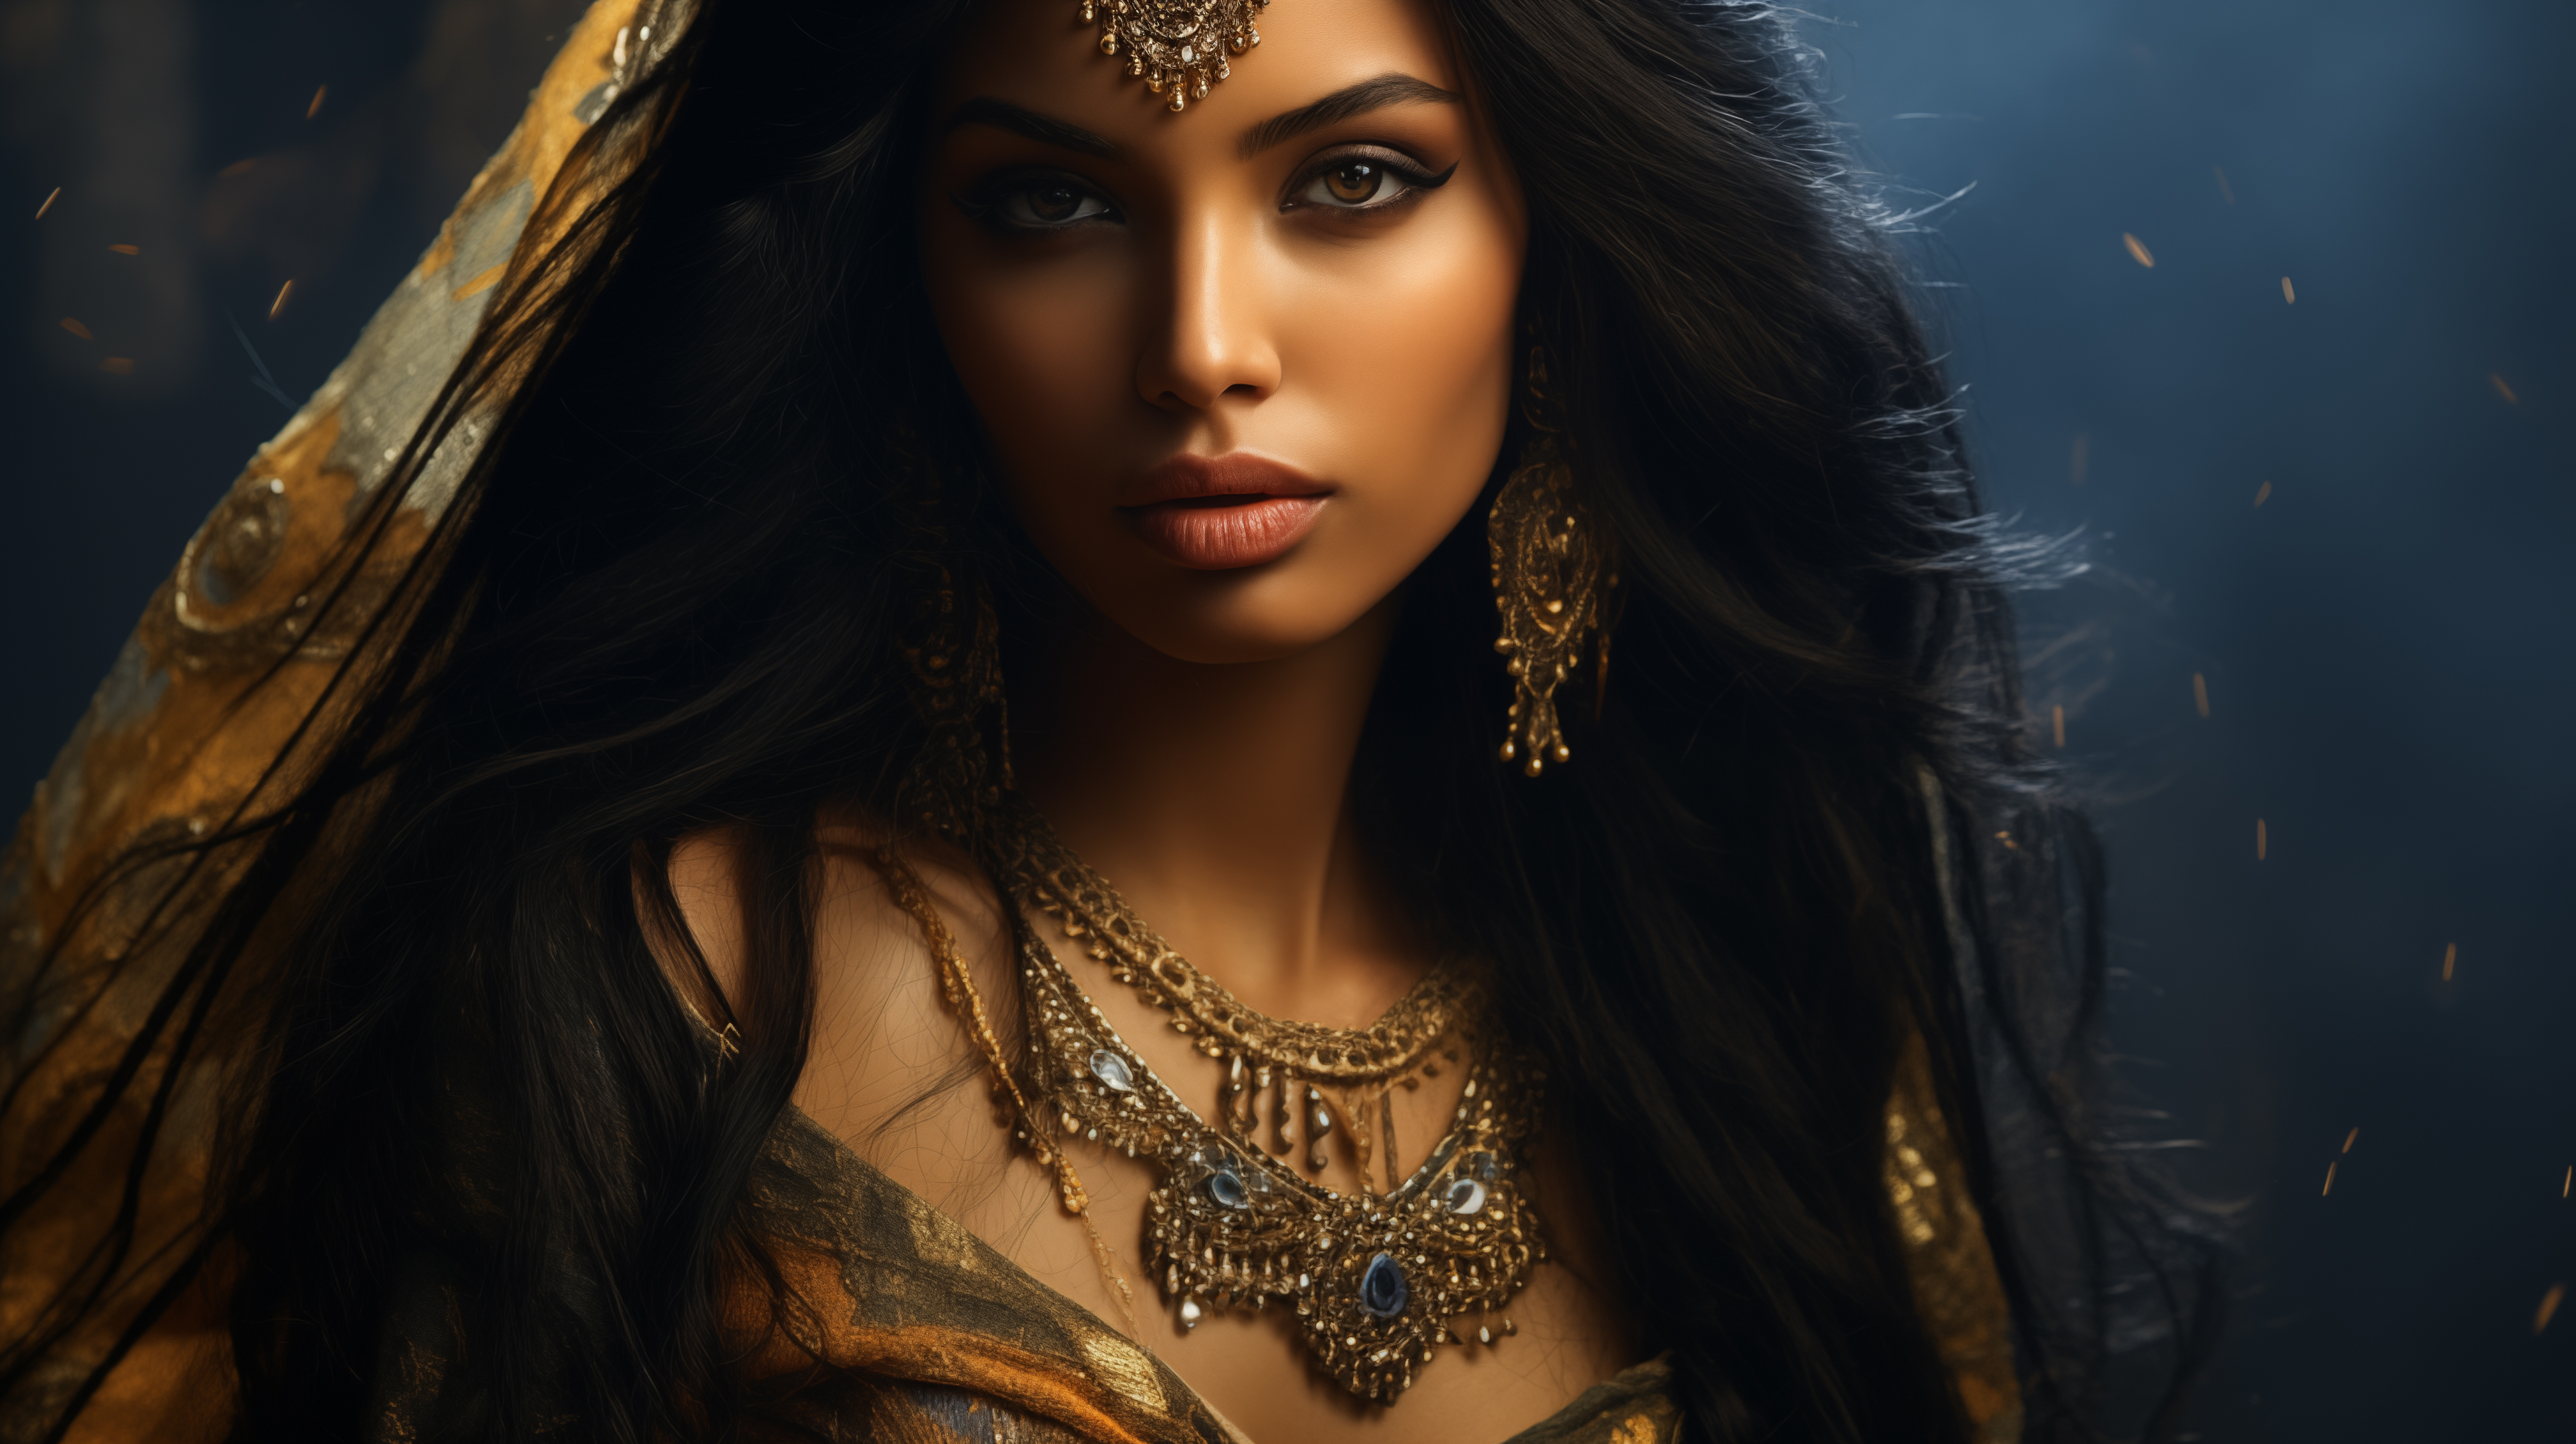 General 3854x2160 AI art digital art portrait women black hair medieval clothes necklace looking at viewer parted lips long hair jewelry tanned juicy lips gemstones face